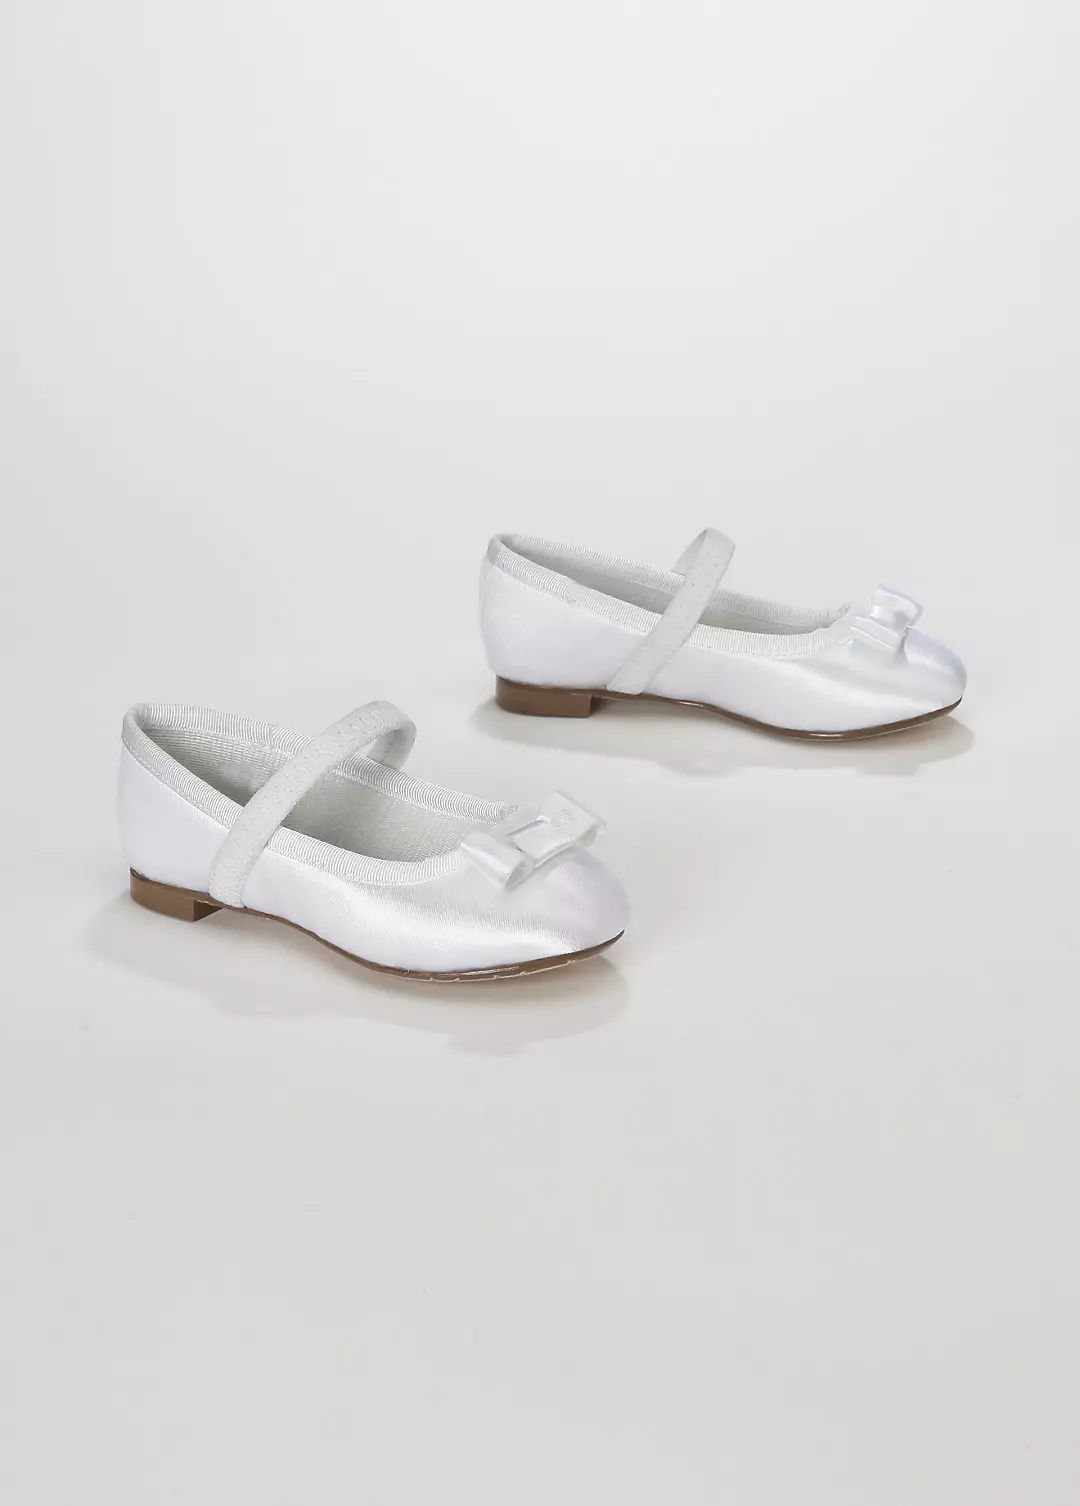 Dyeable Flower Girl Ballet Flat with Grosgrain Bow Image